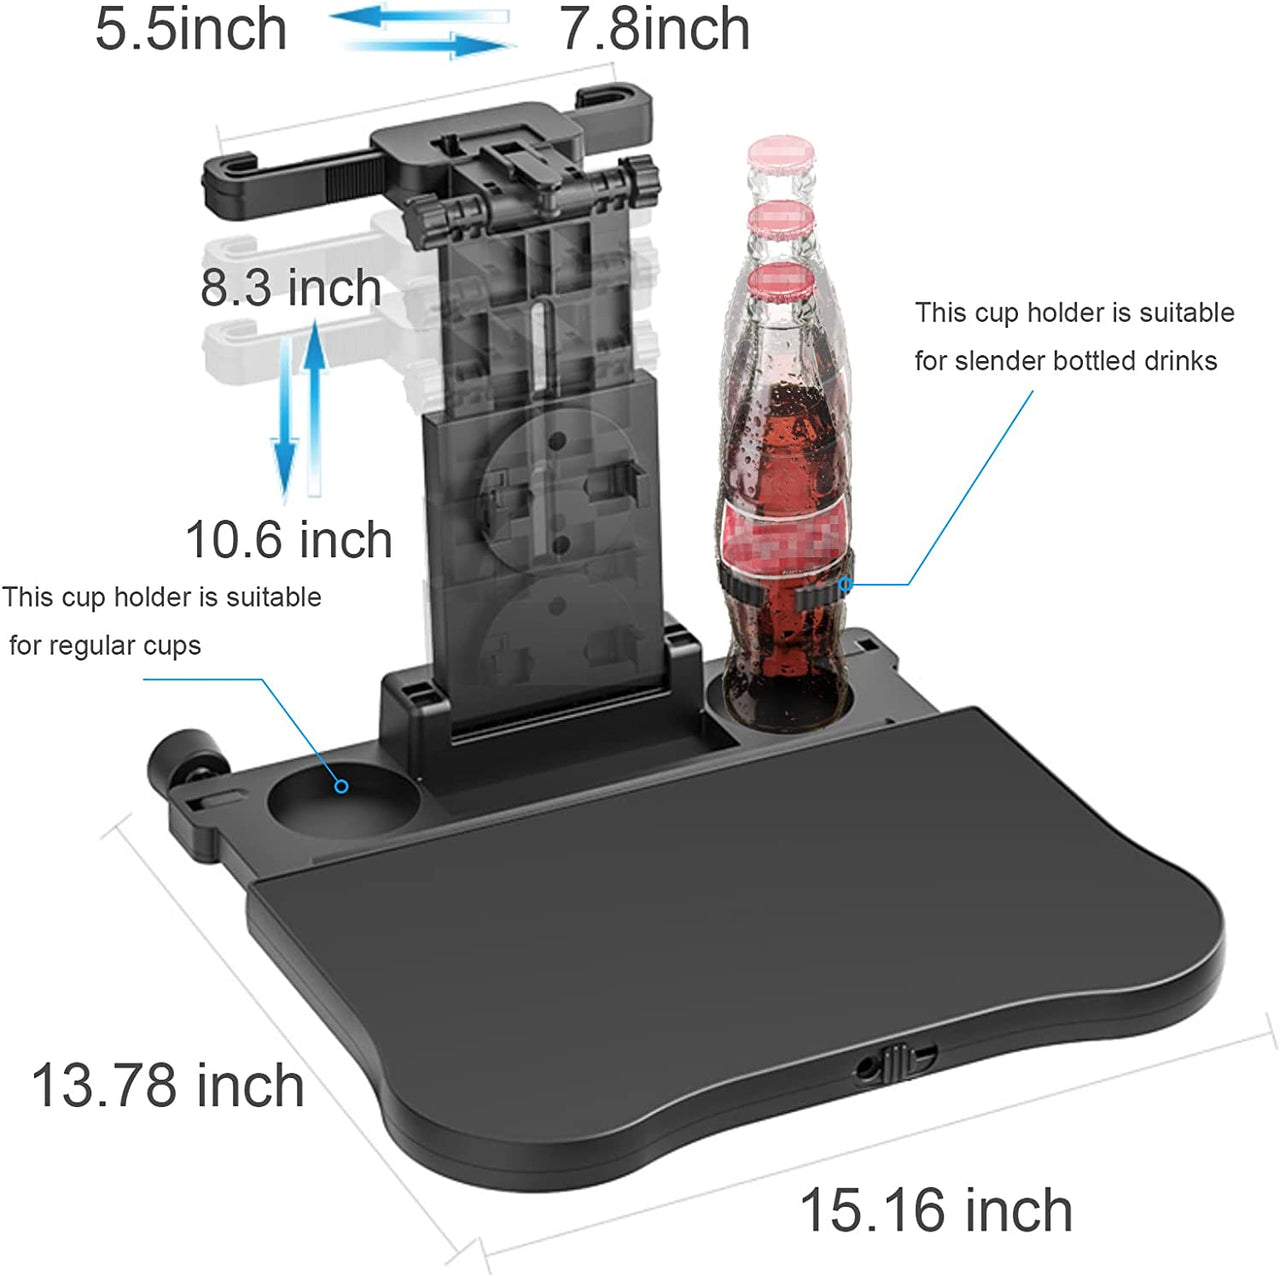 Car Backseat Tray Table, Foldable Tray Seat Back Laptop Desk for Car Travel, Multifunctional Car Back Seat Food Tray, Car Table with Phone Holder, for Working, Writing, Eating, Traveling